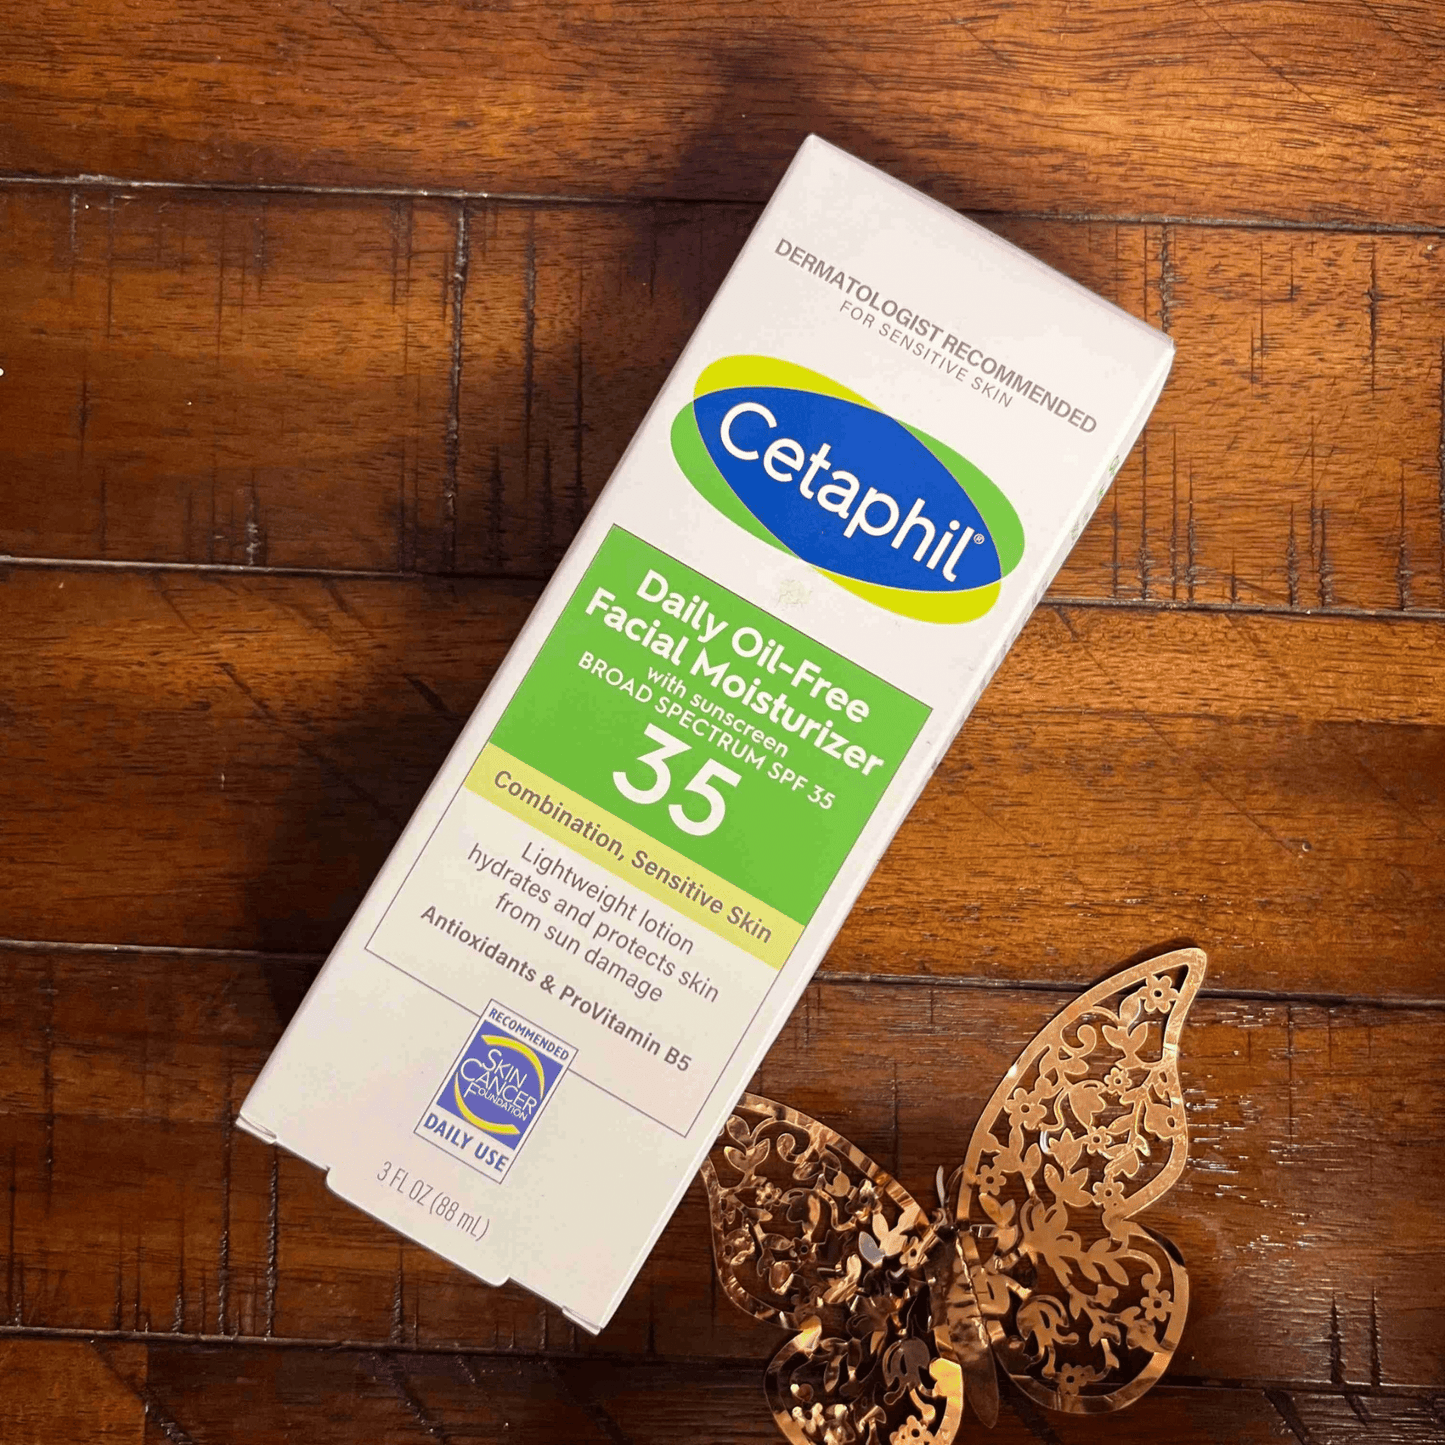 Cetaphil Daily Oil-Free Facial Moisturizer with Sunscreen SPF 35 (88 ml)